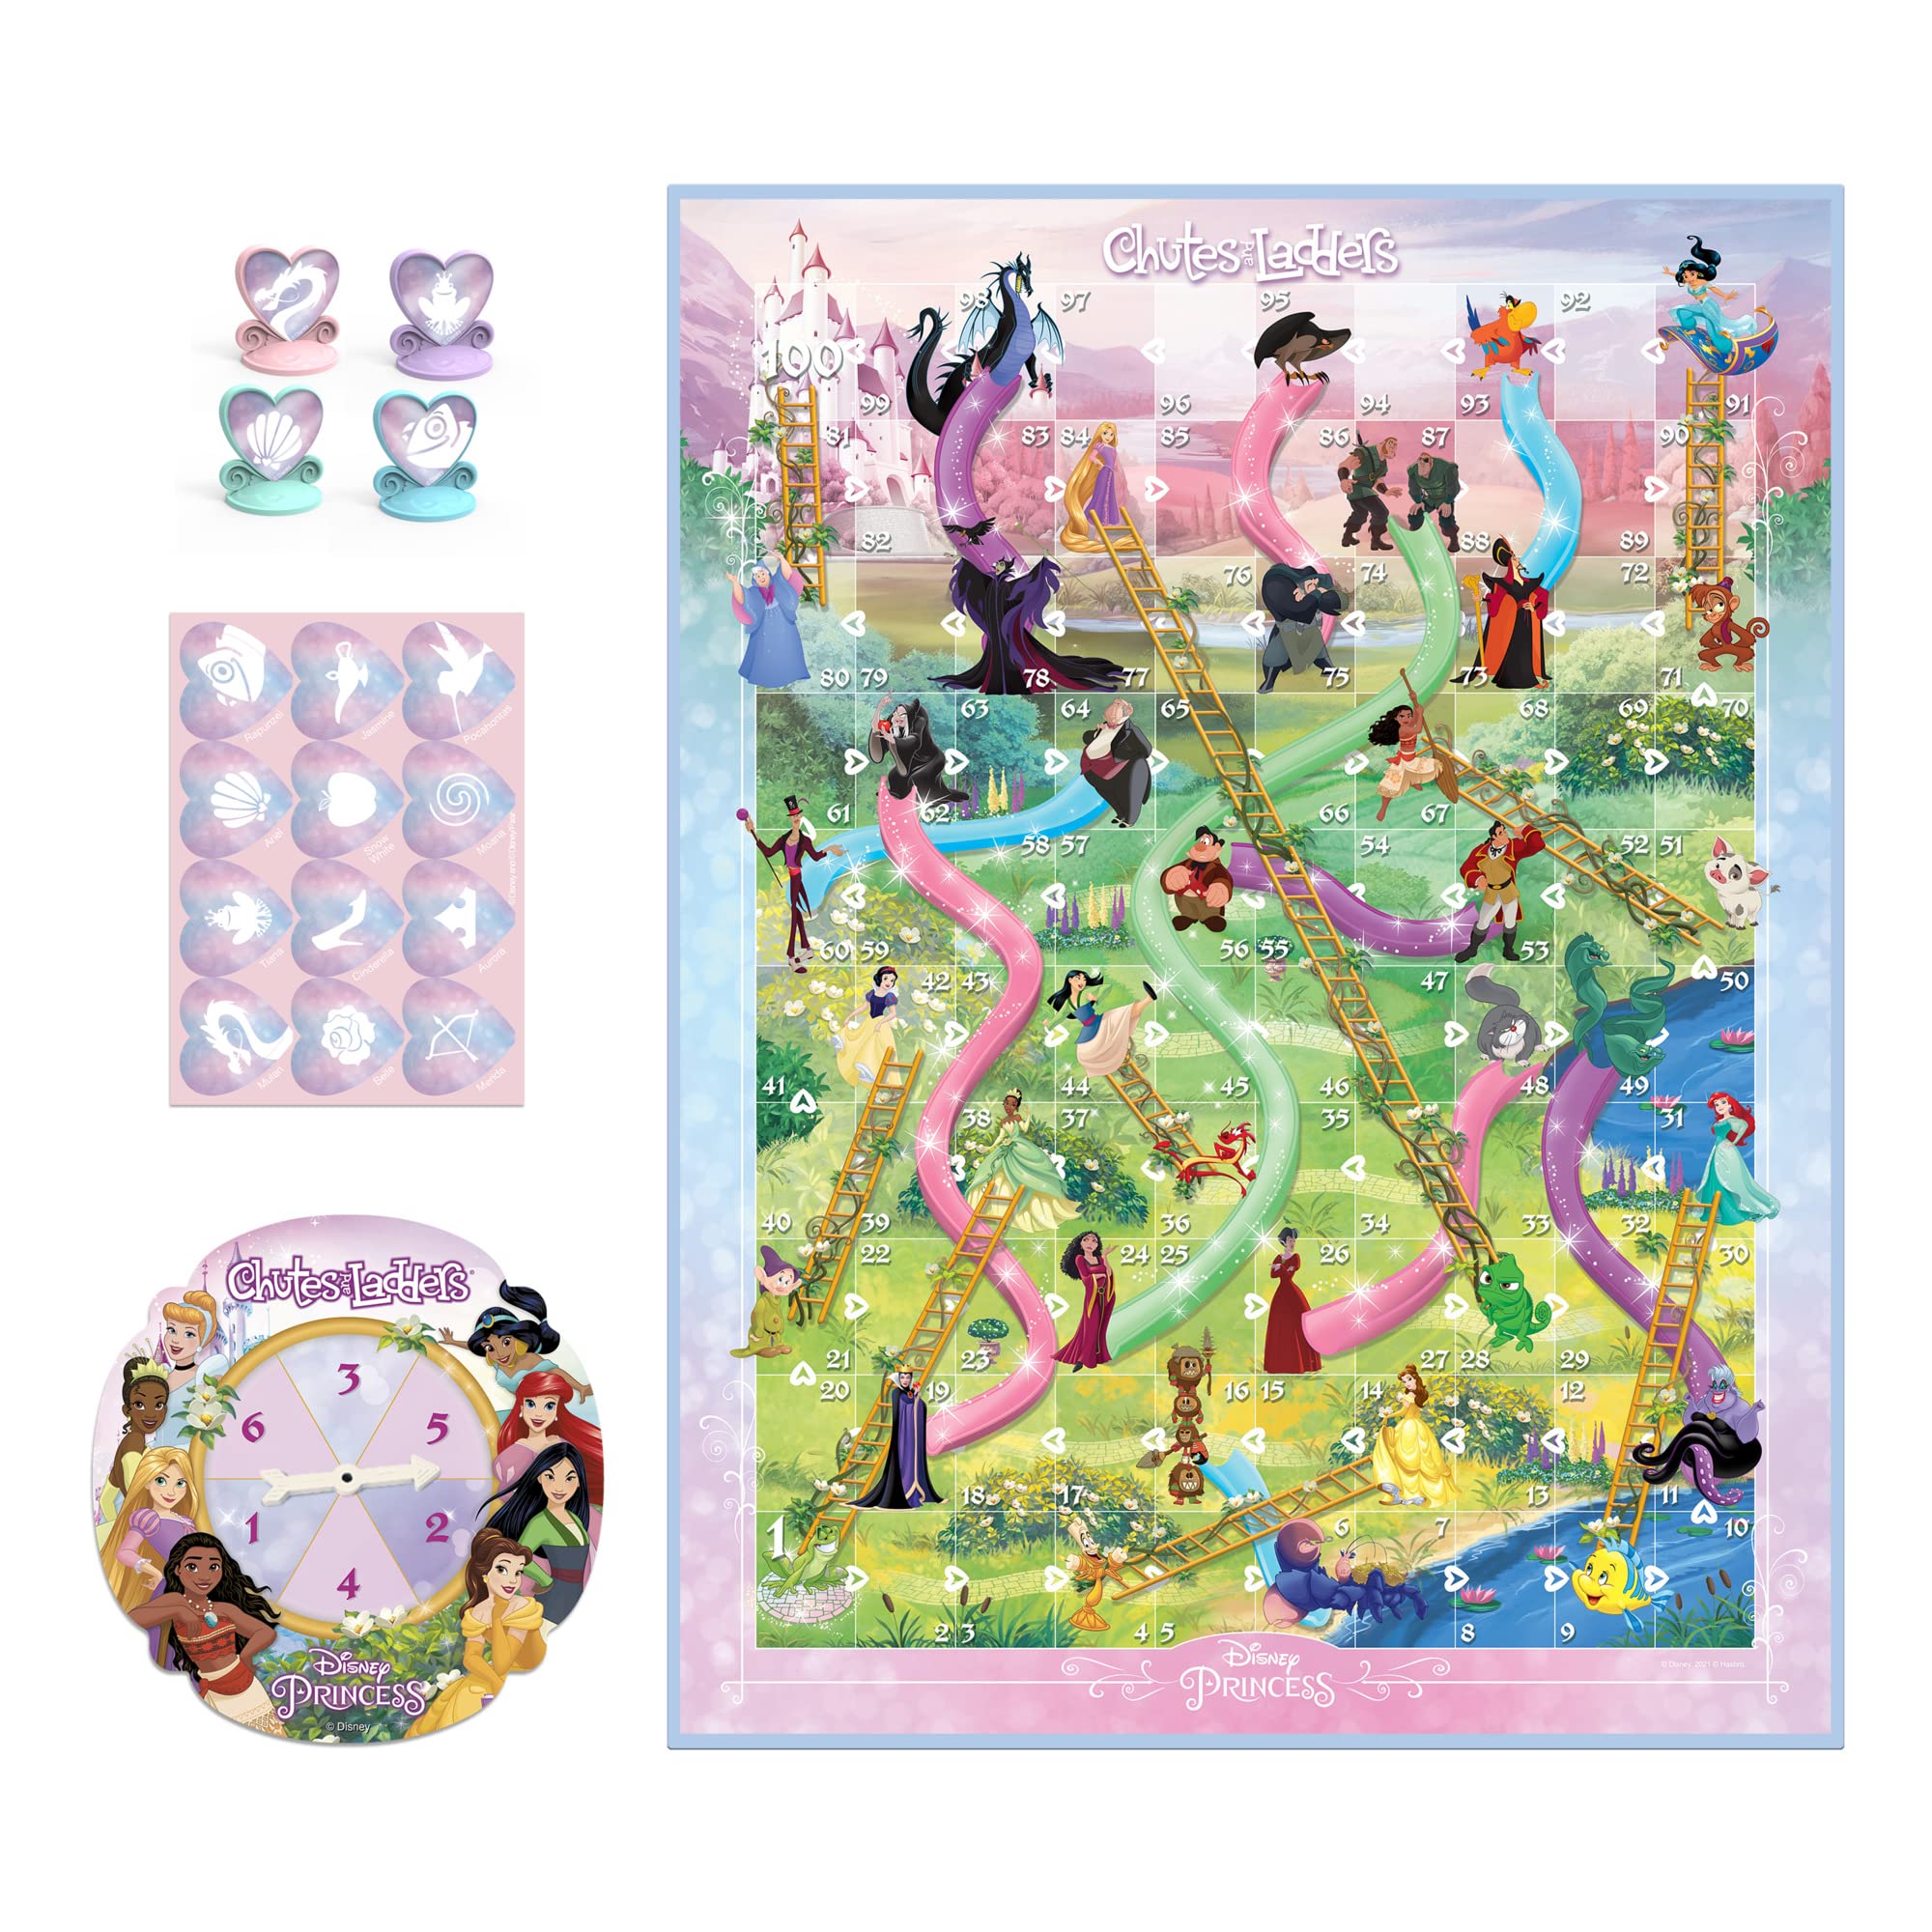 Chutes and Ladders: Disney Princess Edition Board Game for Kids Ages 3 and Up, Preschool Game for 2-4 Players (Amazon Exclusive)